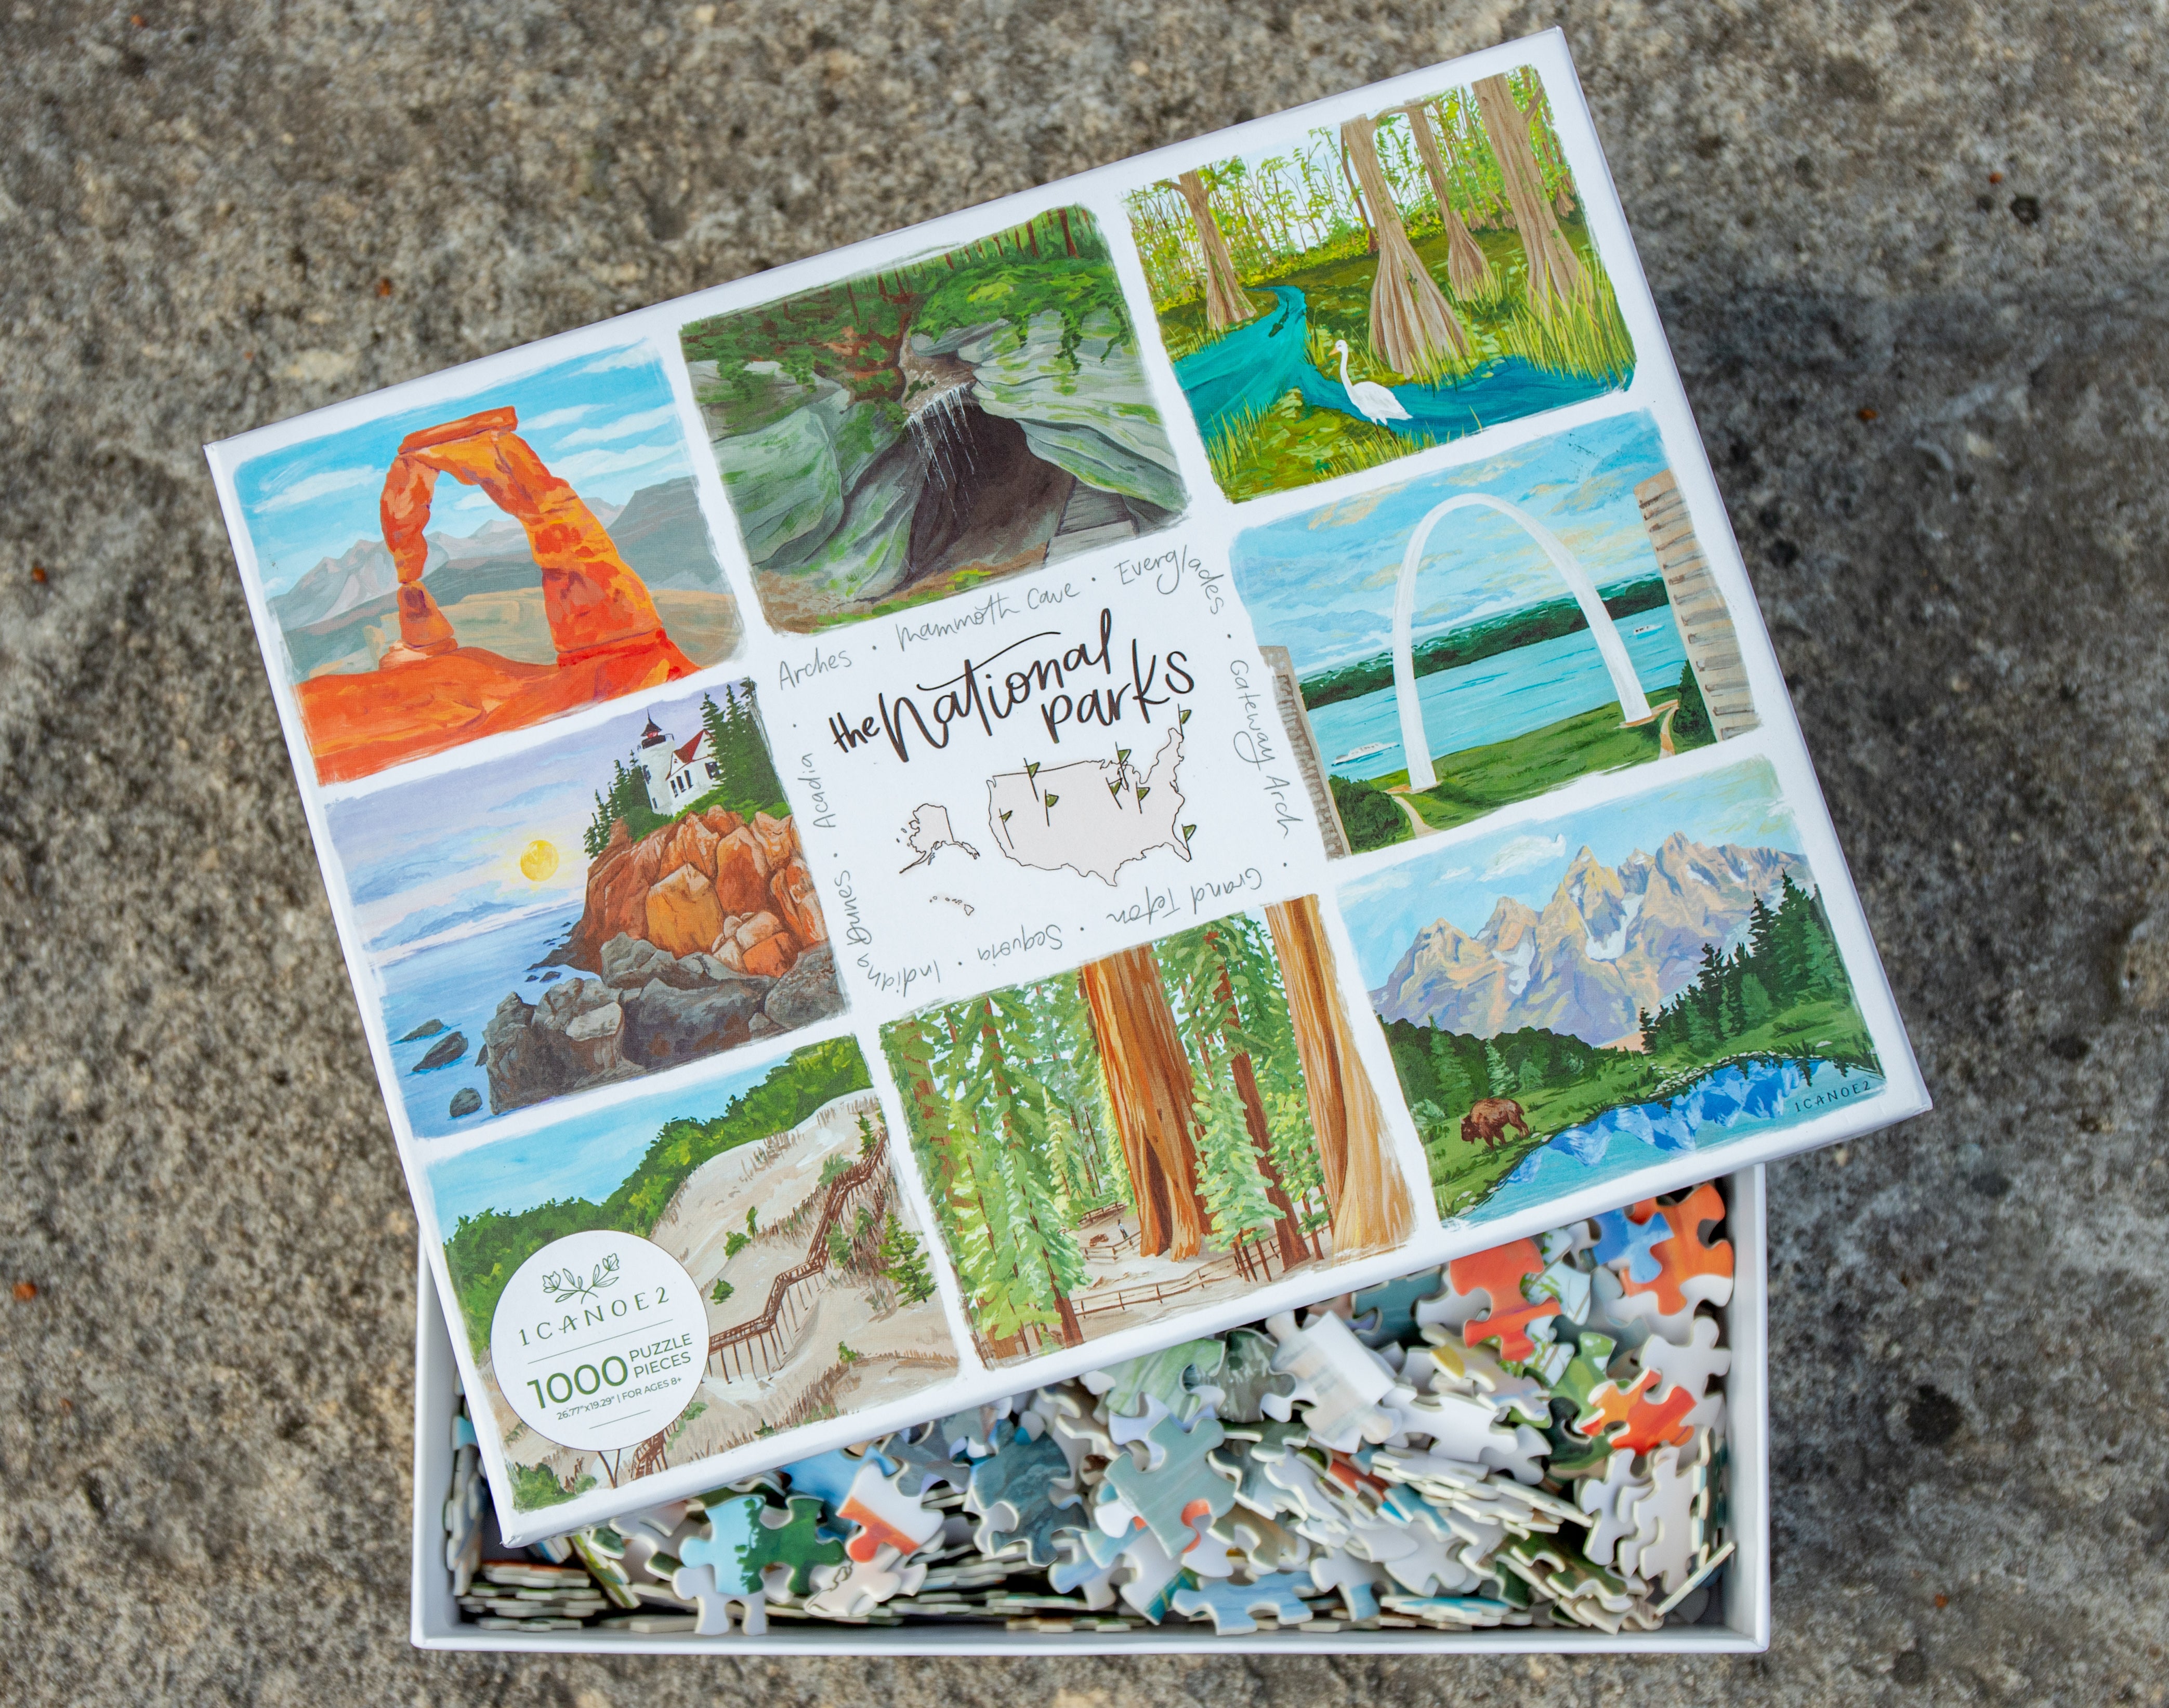 The National Parks 1000 Piece Puzzle Discover beautifully illustrated scenes from Arches, Mammoth Cave, Everglades, Acadia, Gateway Arch, Indiana Dunes, Sequoia, and Grand Tetons National Parks. By 1 CANOE 2.